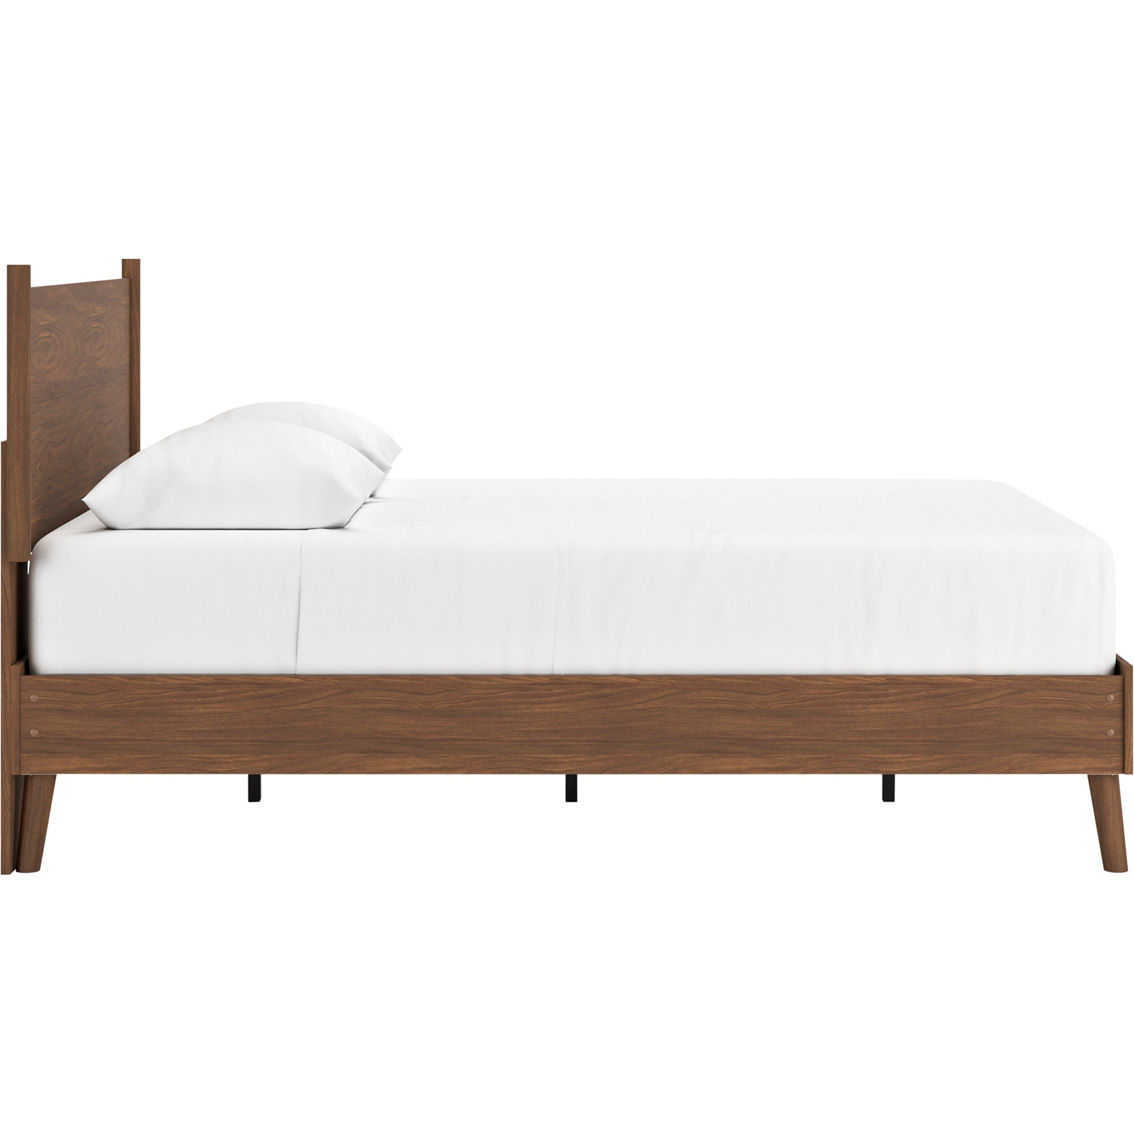 Signature Design by Ashley Fordmont Ready-to-Assemble Platform Bed with Headboard - Image 7 of 7